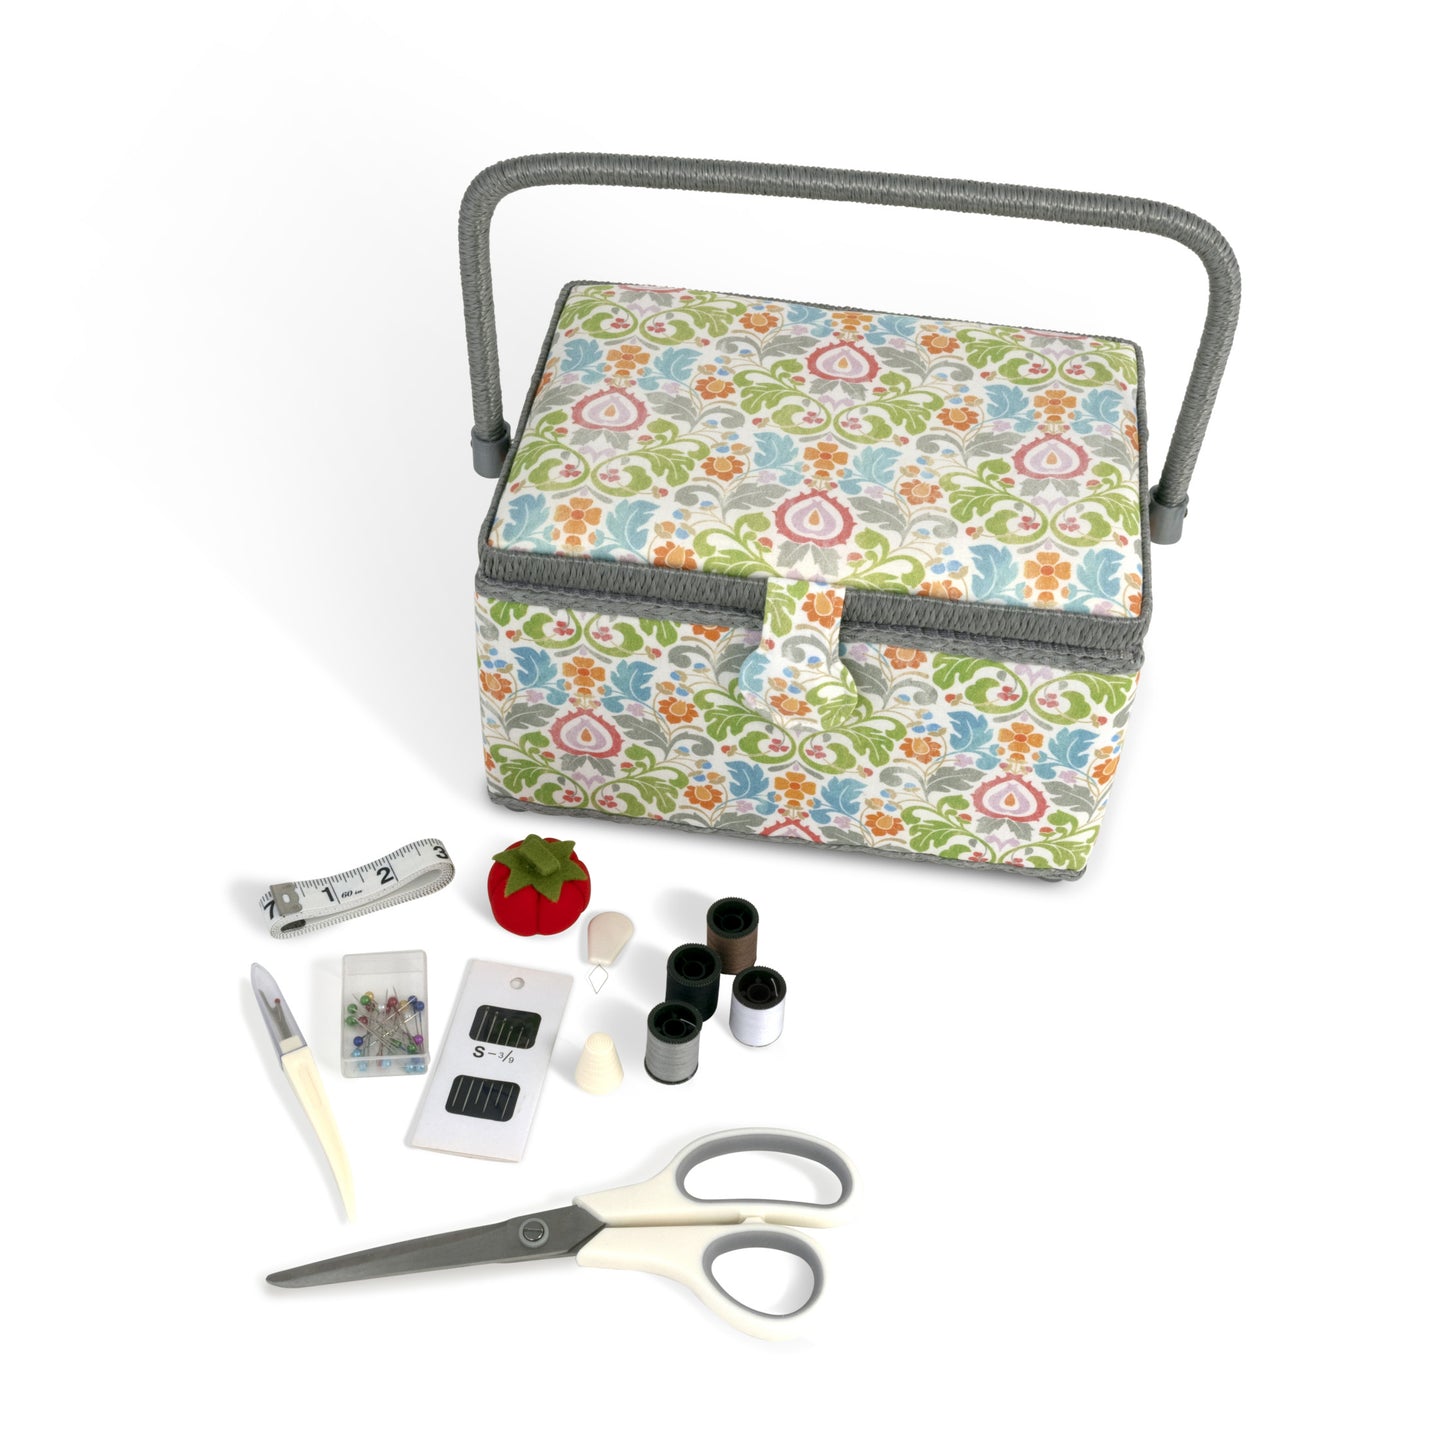 Sewing Basket,Sewing Box for Sewing Supplies